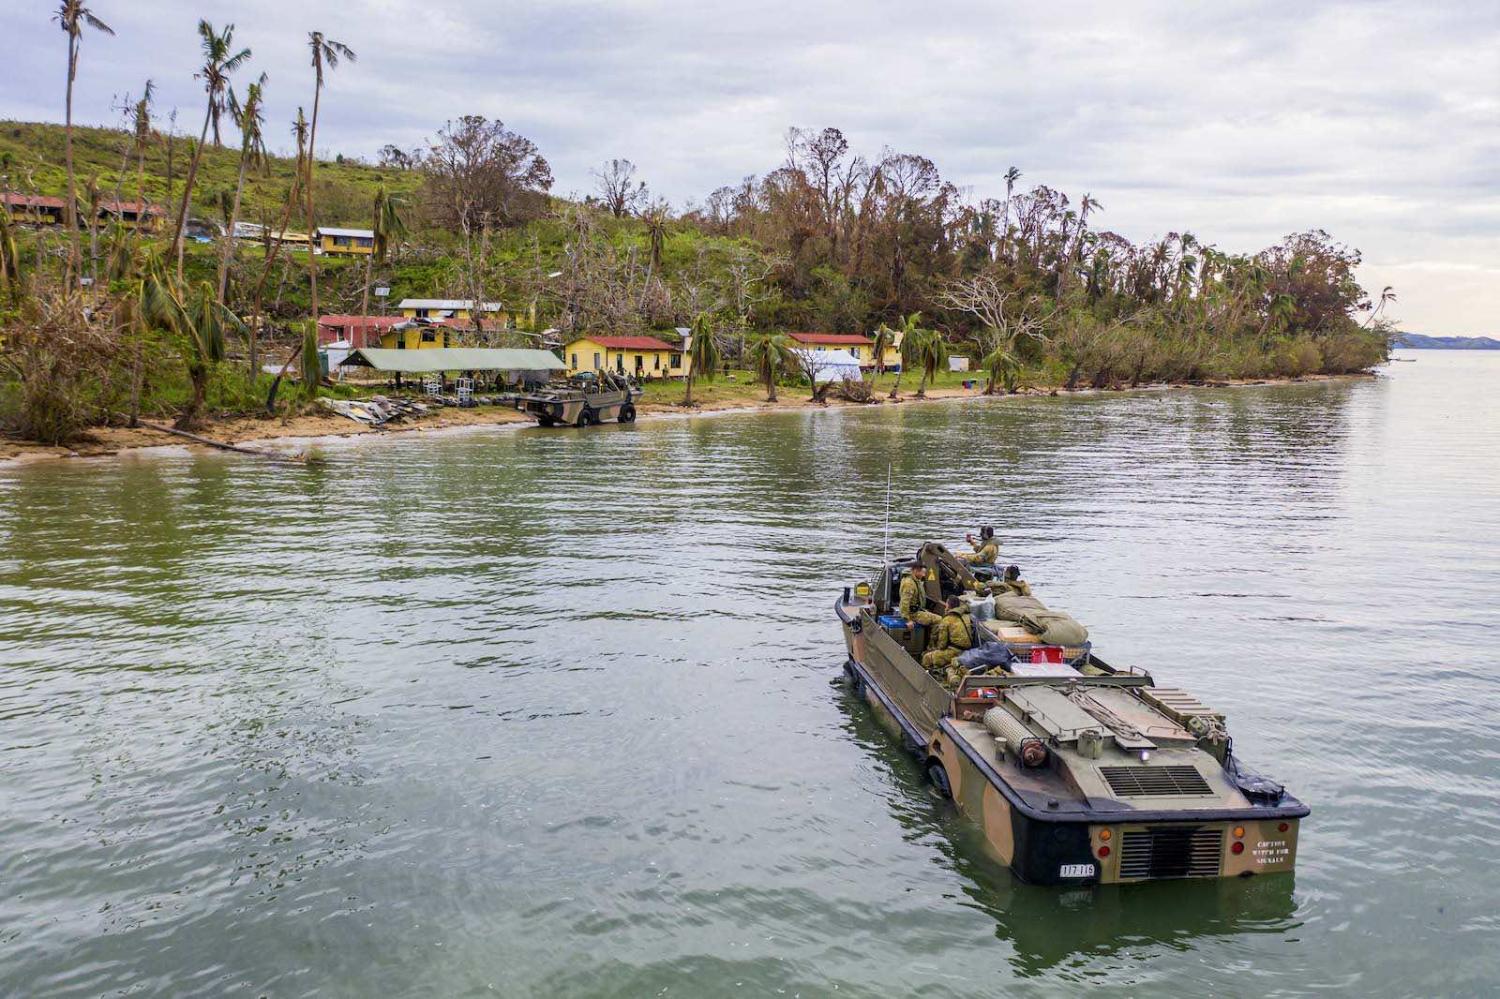 Australian soldiers land on the island of Galoa, near Vanua Levu, in Fiji to drop off supplies required to repair buildings affected by Cyclone Yasa in December 2020 (Department of Defence)